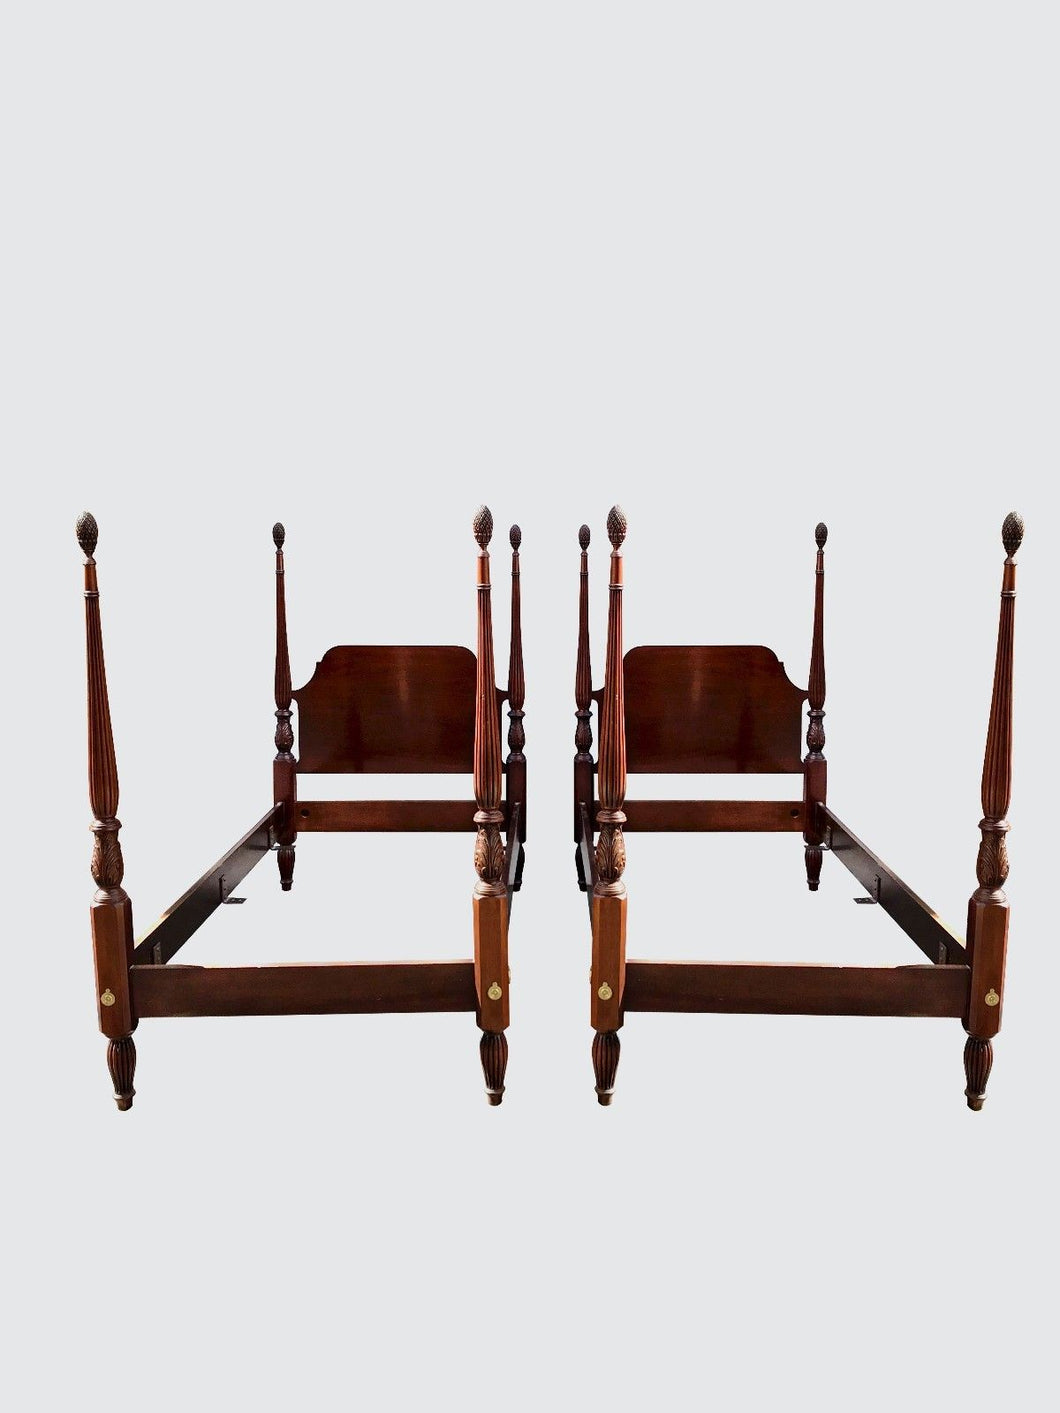 PAIR COUNCIL CRAFTSMAN FOUR POSTER TWIN MAHOGANY BEDS-THE FINEST!